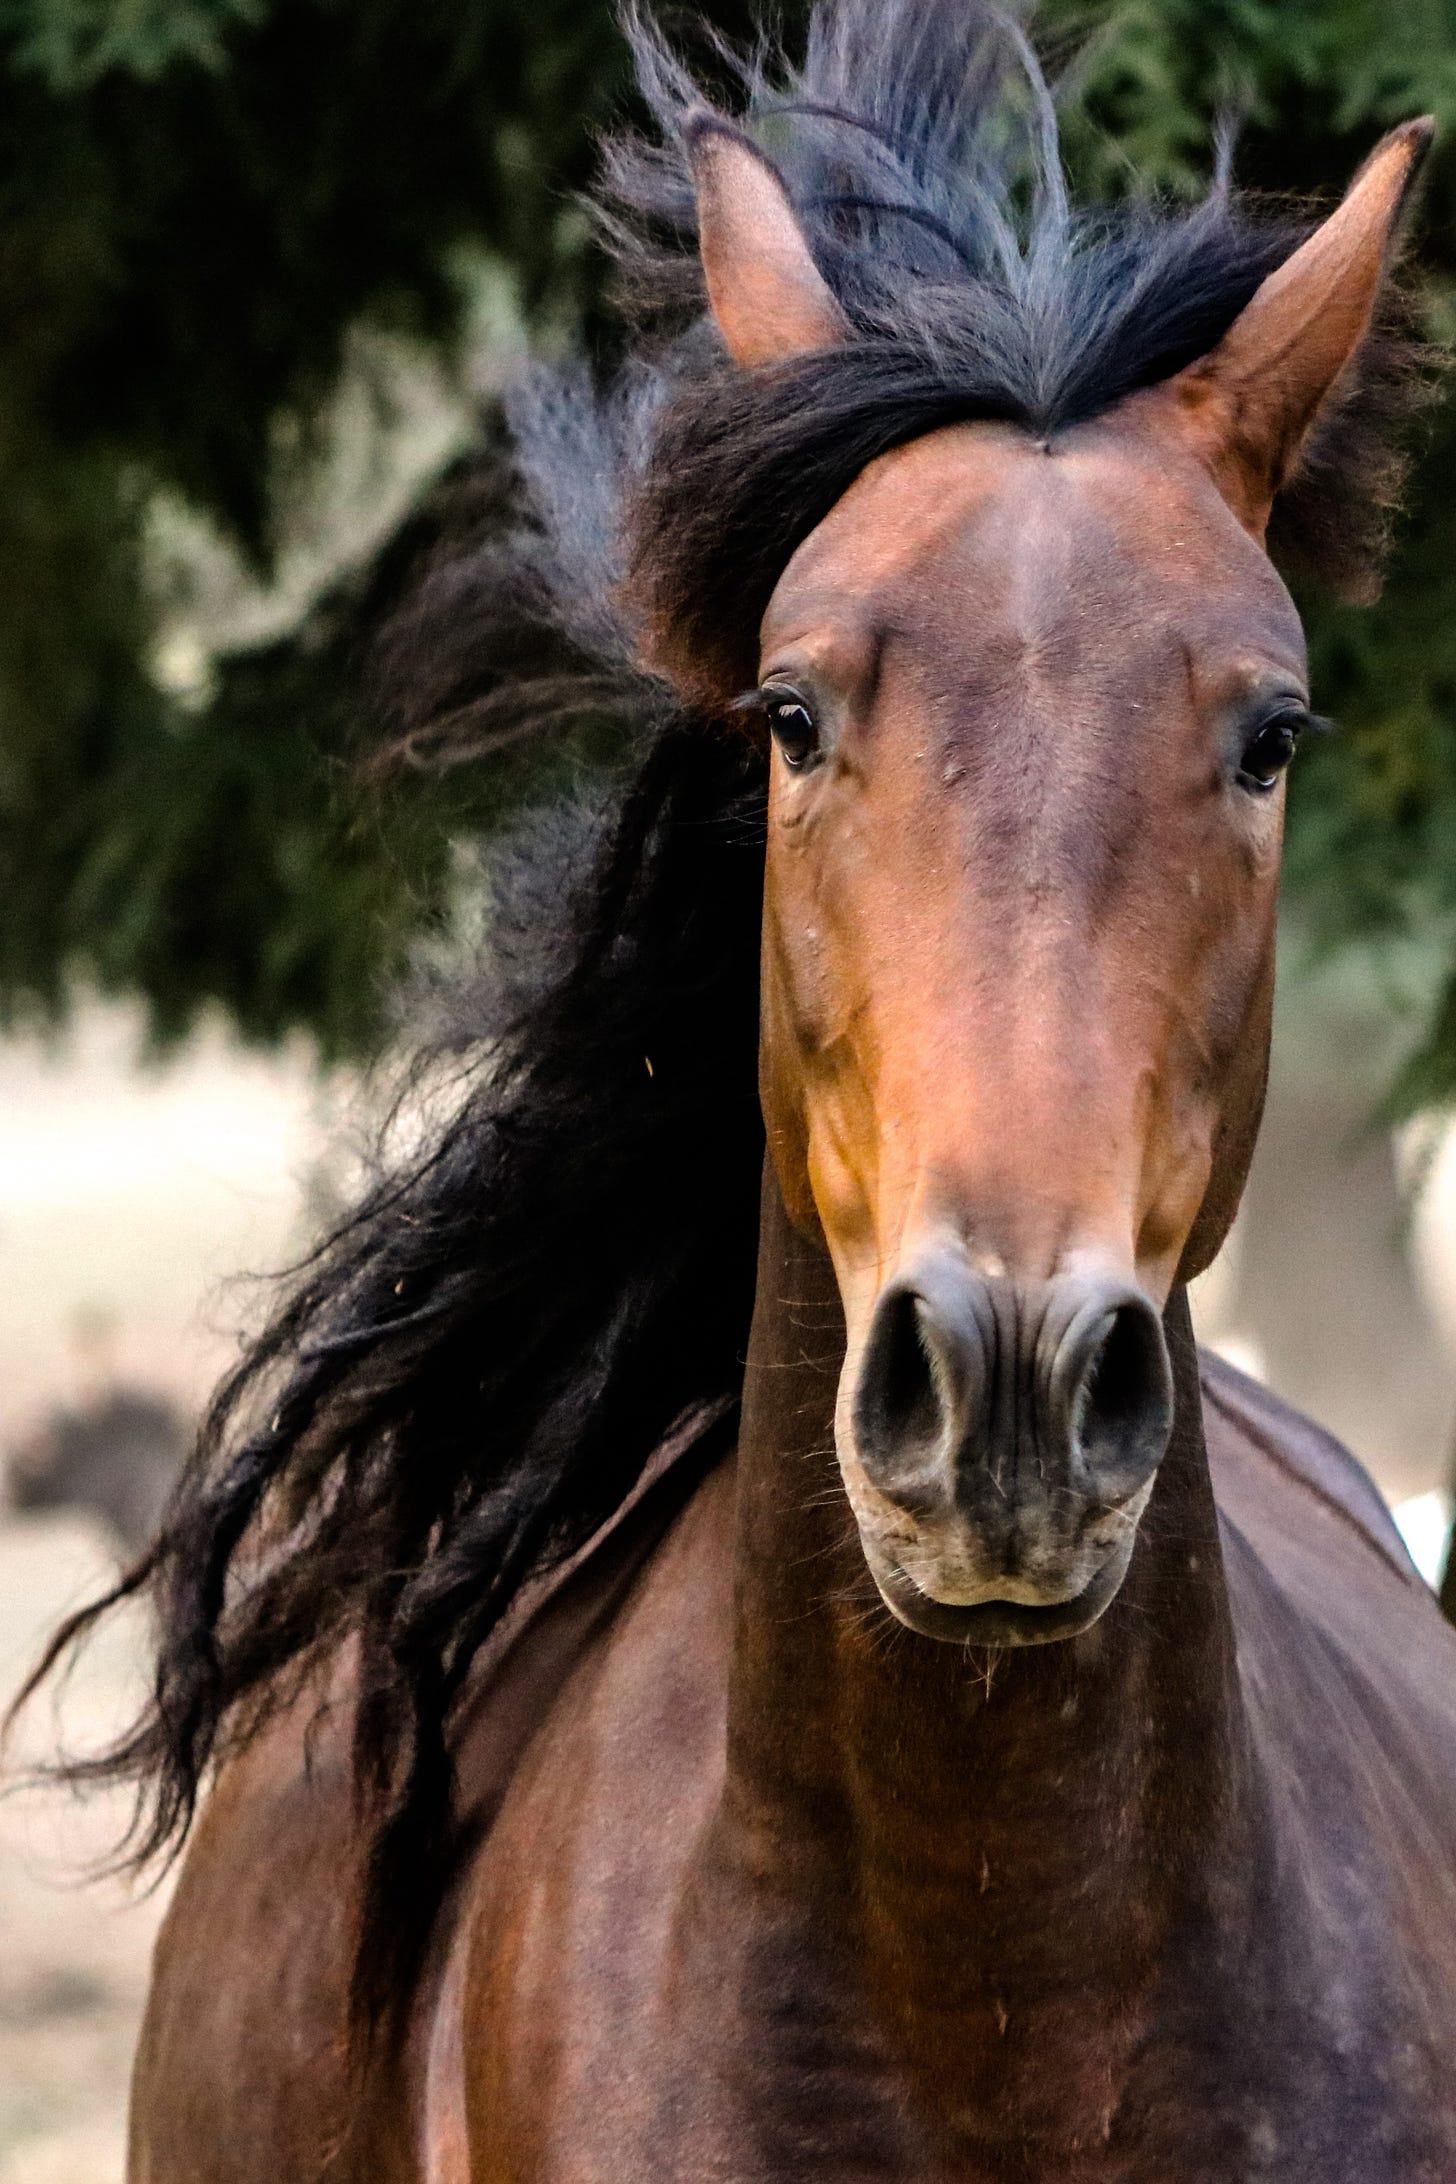 A bay horse looks directly at the camera.